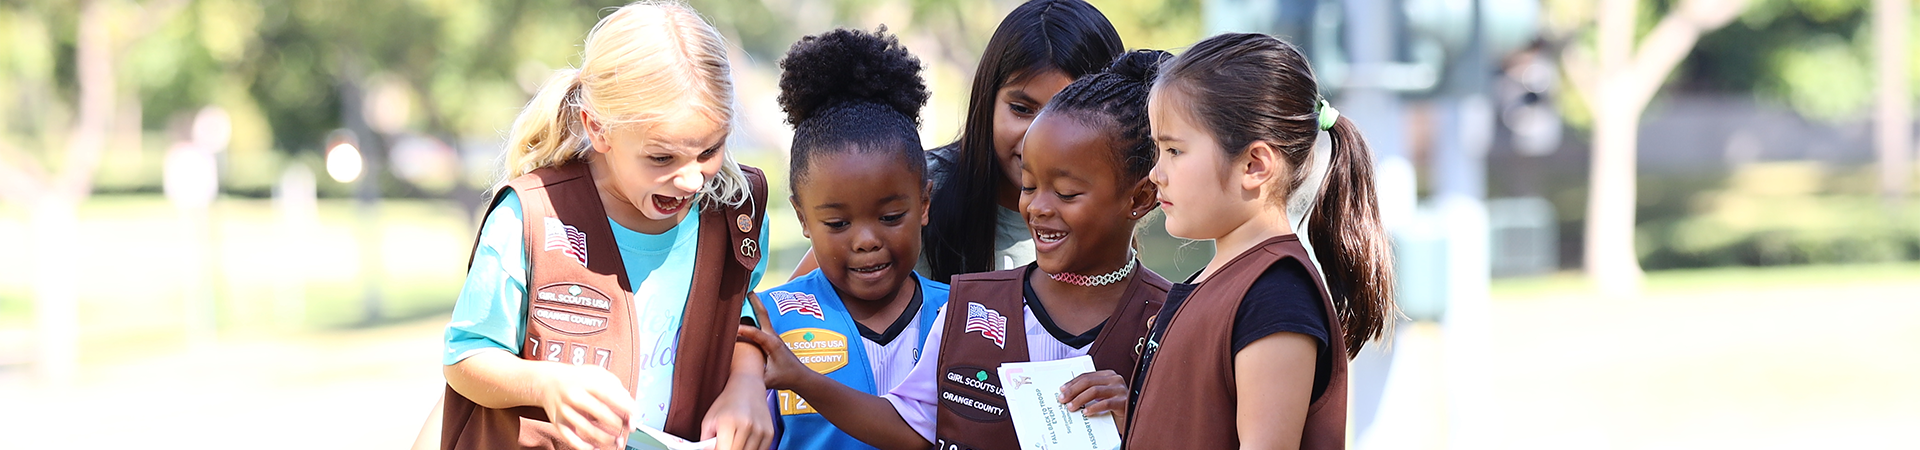  Girl Scouts of Orange County Activities for Girls 